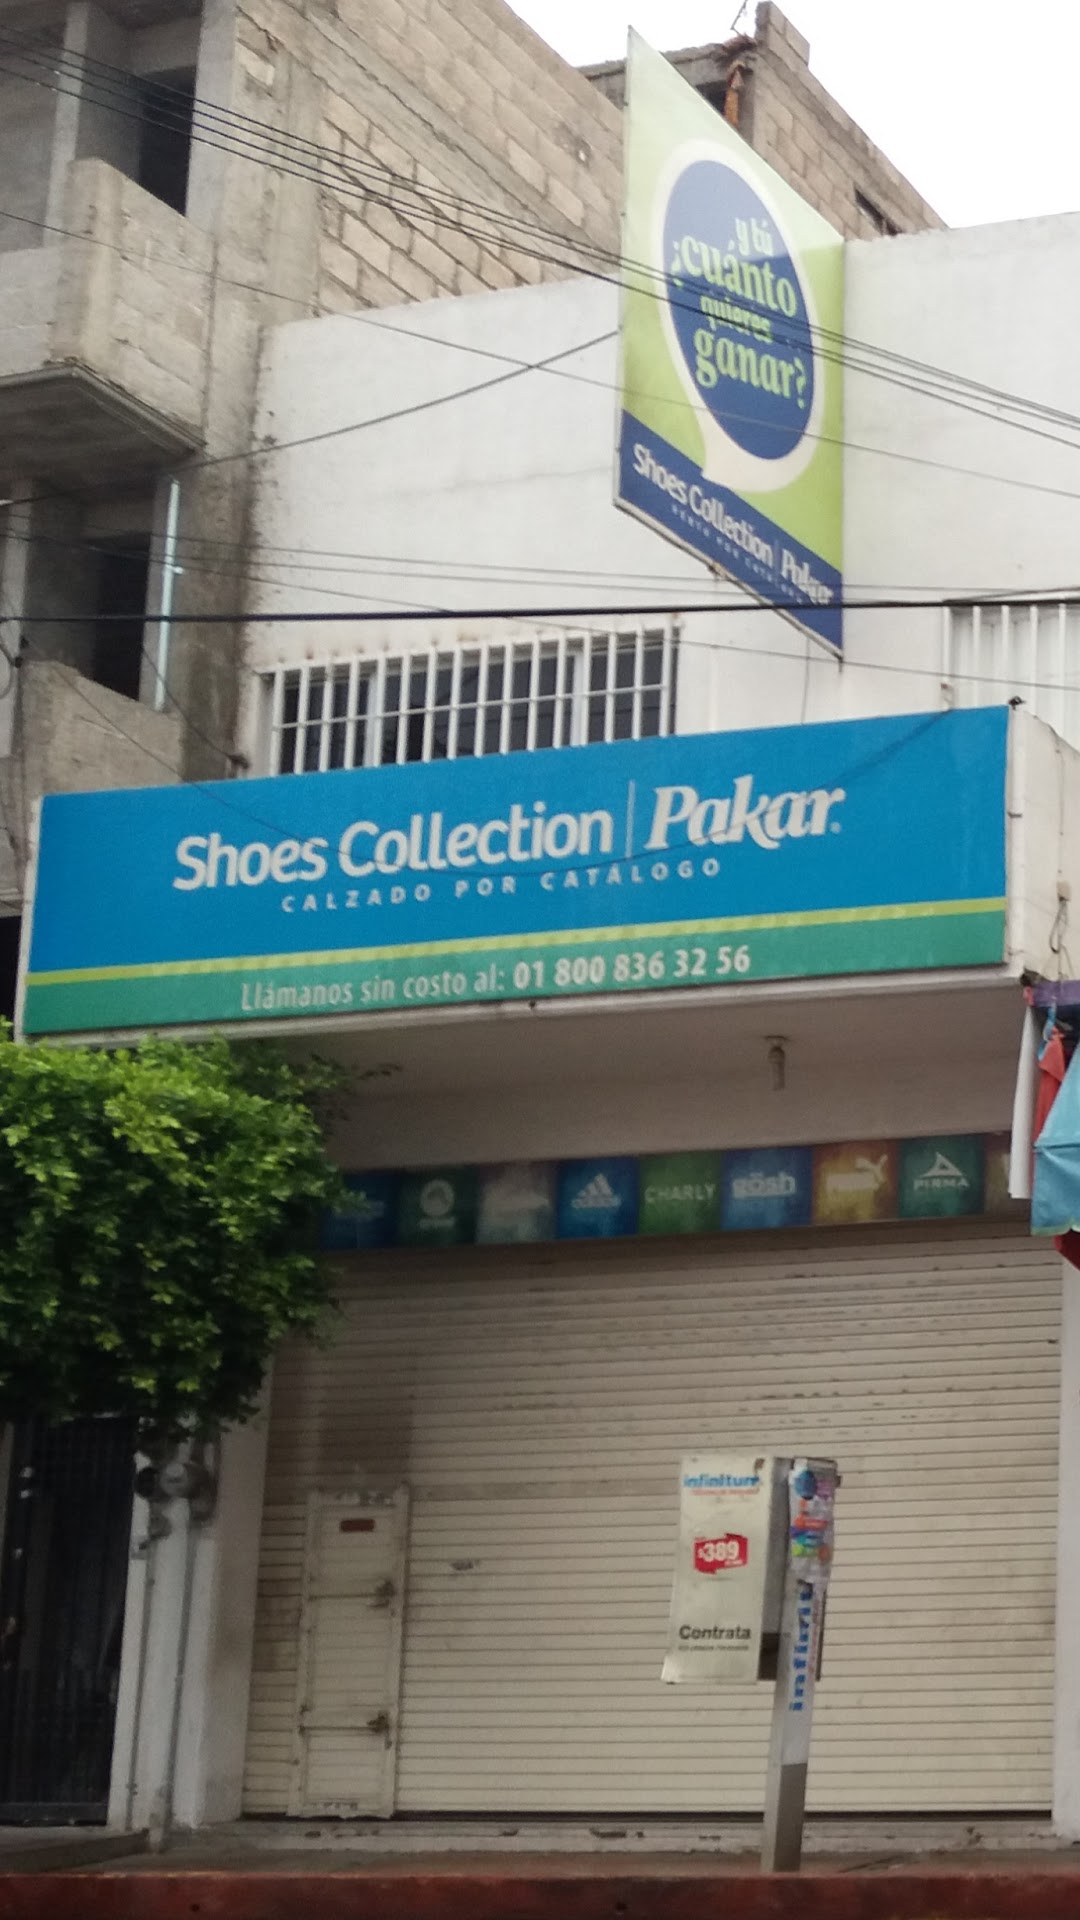 Shoes Collection Pakar